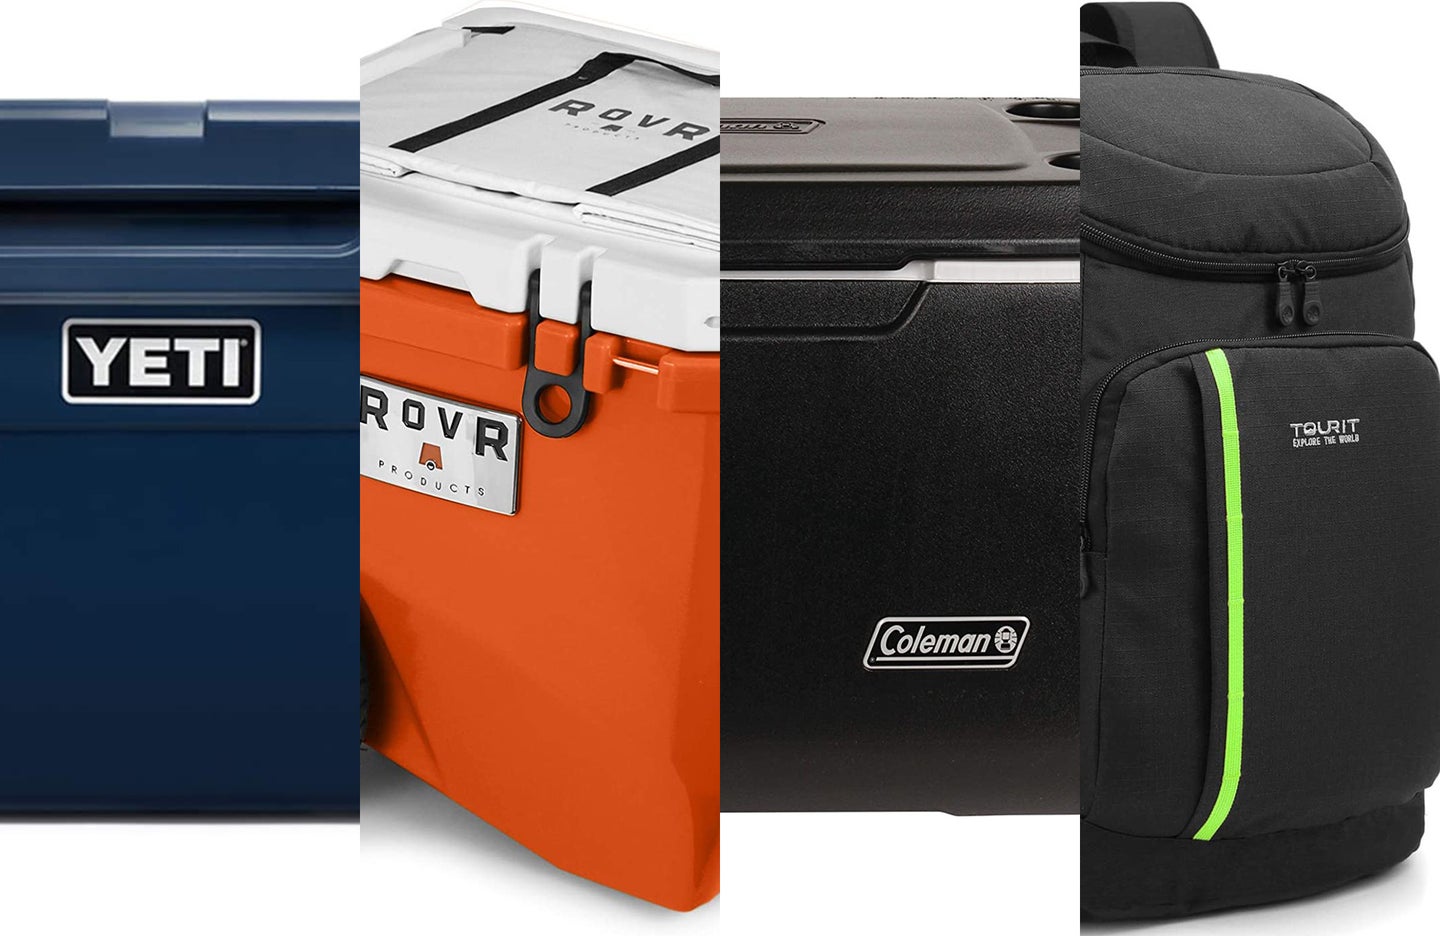 A lineup of the best coolers on a white background